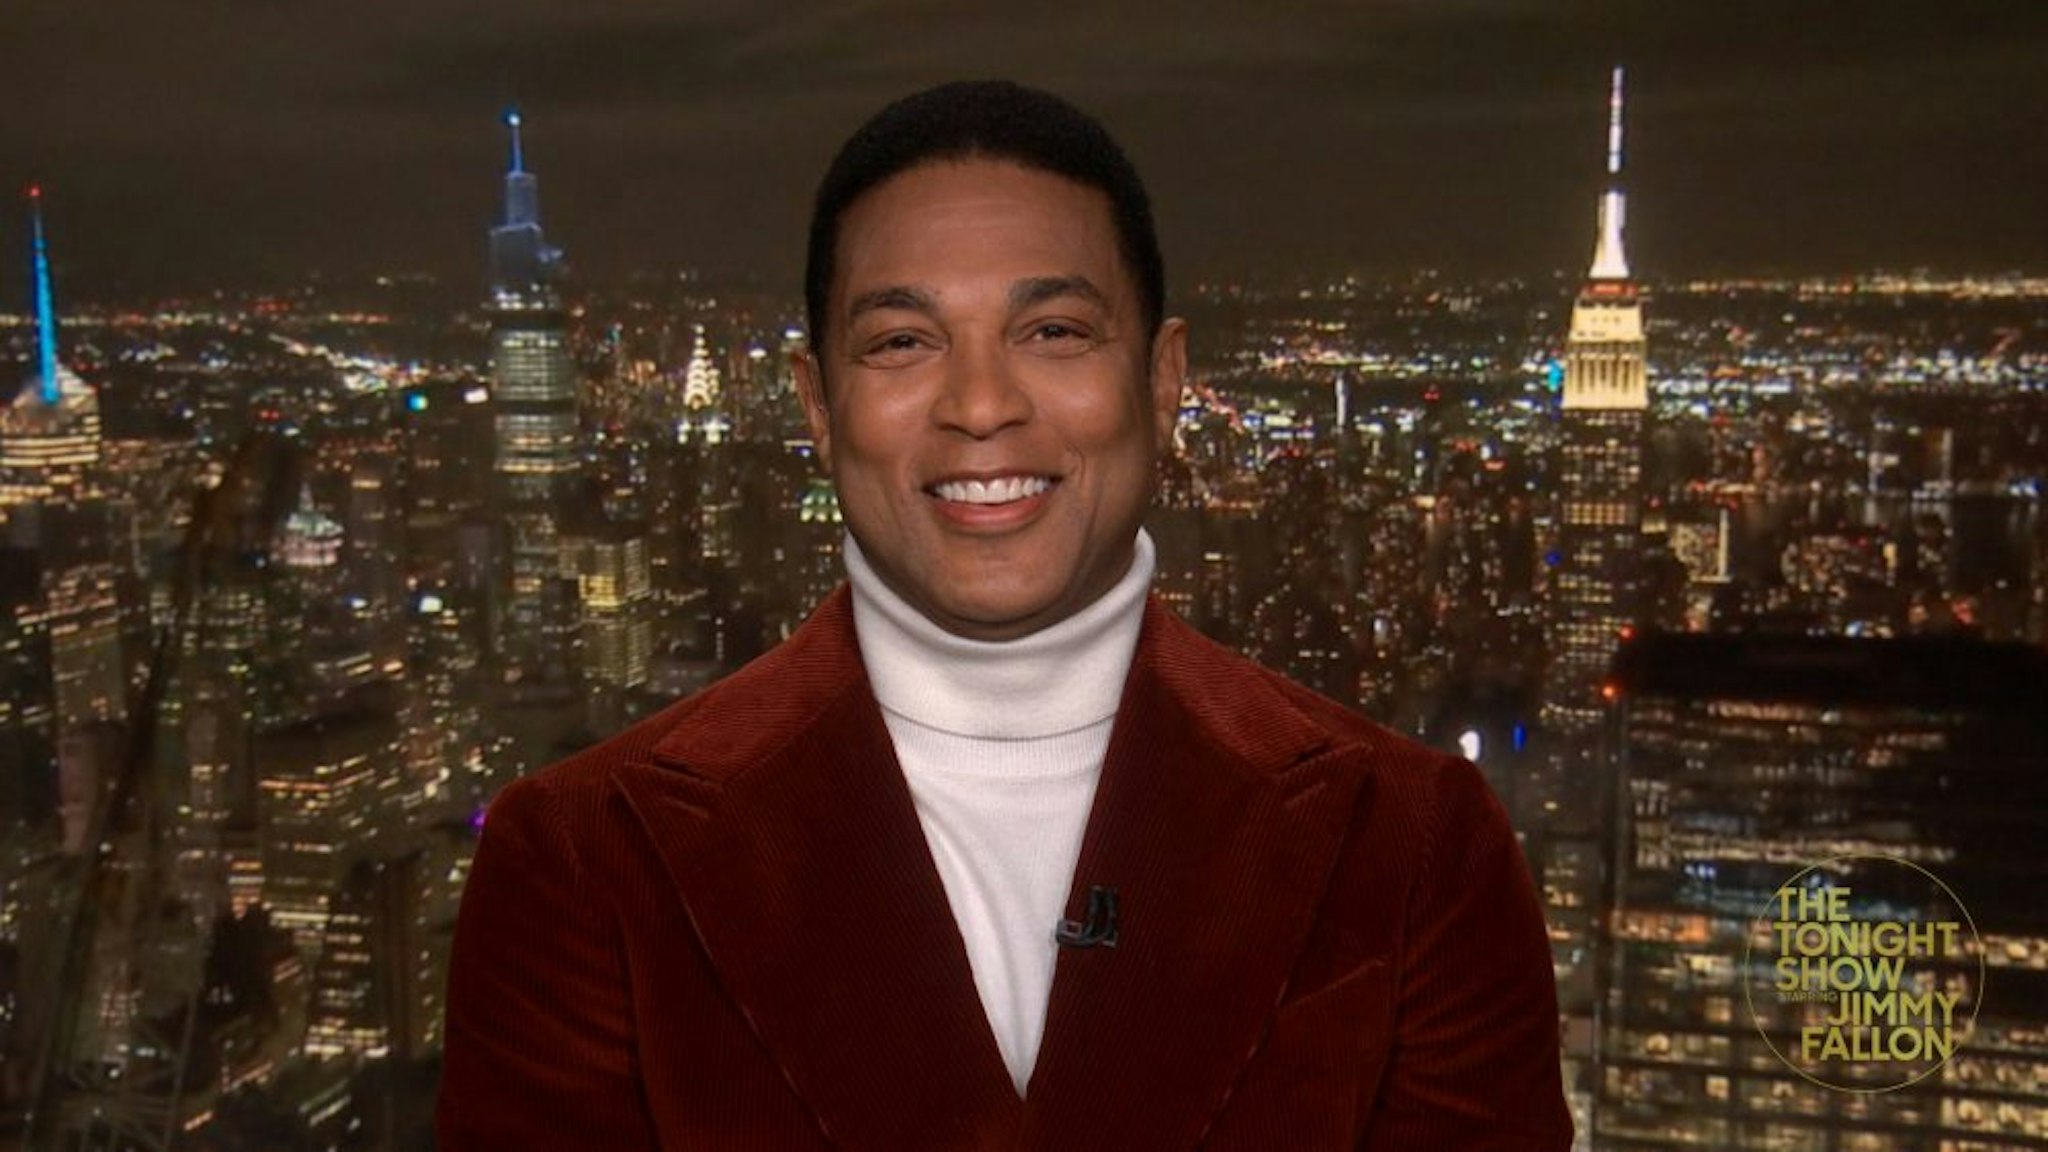 THE TONIGHT SHOW STARRING JIMMY FALLON -- Episode 1422A -- Pictured in this screengrab: Television journalist Don Lemon during an interview on March 11, 2021